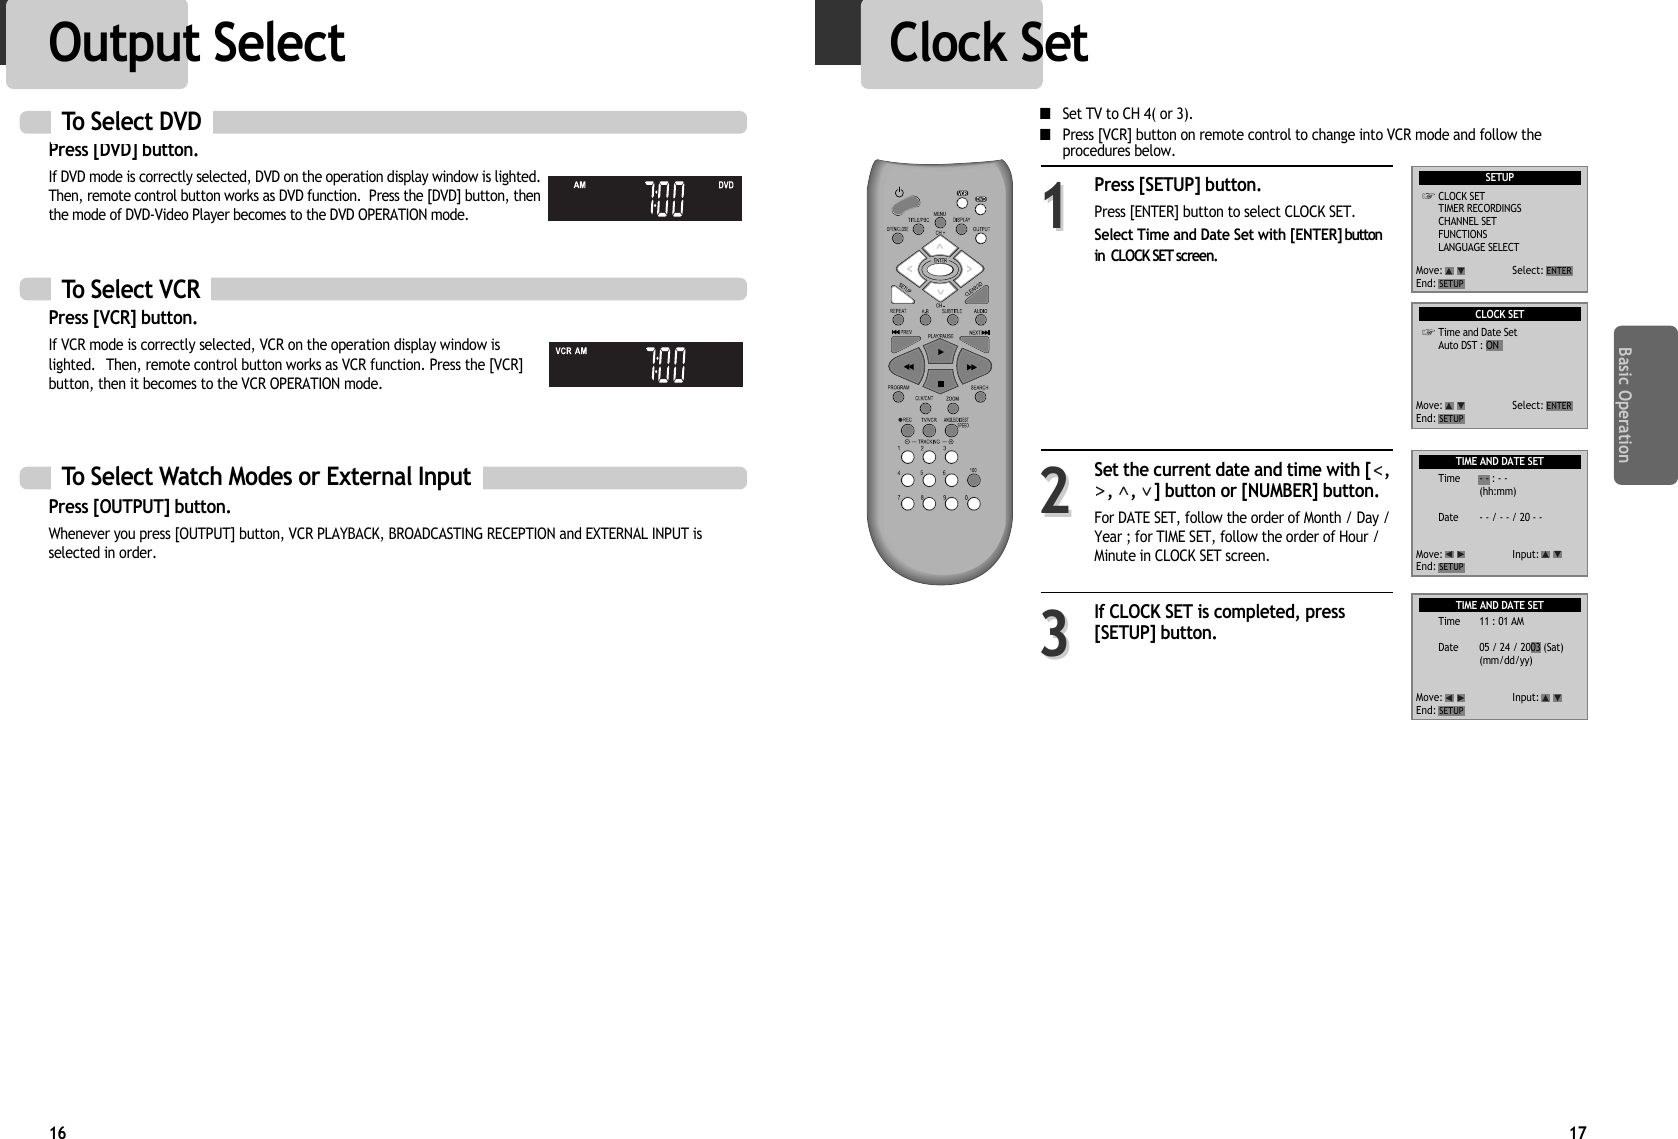 Press [DVD] button. If DVD mode is correctly selected, DVD on the operation display window is lighted.Then, remote control button works as DVD function.  Press the [DVD] button, thenthe mode of DVD-Video Player becomes to the DVD OPERATION mode.Basic Operation17Clock SetPress [SETUP] button.Press [ENTER] button to select CLOCK SET.Select Time and Date Set with [ENTER] buttonin  CLOCK SET screen.Set the current date and time with [ ,,  ,  ] button or [NUMBER] button.For DATE SET, follow the order of Month / Day /Year ; for TIME SET, follow the order of Hour /Minute in CLOCK SET screen.  If CLOCK SET is completed, press[SETUP] button.112233To Select VCRPress [VCR] button.If VCR mode is correctly selected, VCR on the operation display window islighted.  Then, remote control button works as VCR function. Press the [VCR]button, then it becomes to the VCR OPERATION mode.To Select Watch Modes or External InputPress [OUTPUT] button.Whenever you press [OUTPUT] button, VCR PLAYBACK, BROADCASTING RECEPTION and EXTERNAL INPUT isselected in order. To Select DVDSETUPCLOCK SETTIMER RECORDINGSCHANNEL SETFUNCTIONSLANGUAGE SELECTMove: Select:End: SETUPENTERCLOCK SETTime and Date SetAuto DST : ONTIME AND DATE SETTIME AND DATE SETMove: Select:End: SETUPENTERMove: Input:End: SETUPMove: Input:End: SETUPTime - - : - -(hh:mm)Date - - / - - / 20 - -Time 11 : 01 AMDate 05 / 24 / 2003 (Sat)(mm/dd/yy)16■Set TV to CH 4( or 3).■Press [VCR] button on remote control to change into VCR mode and follow theprocedures below.Output Select 